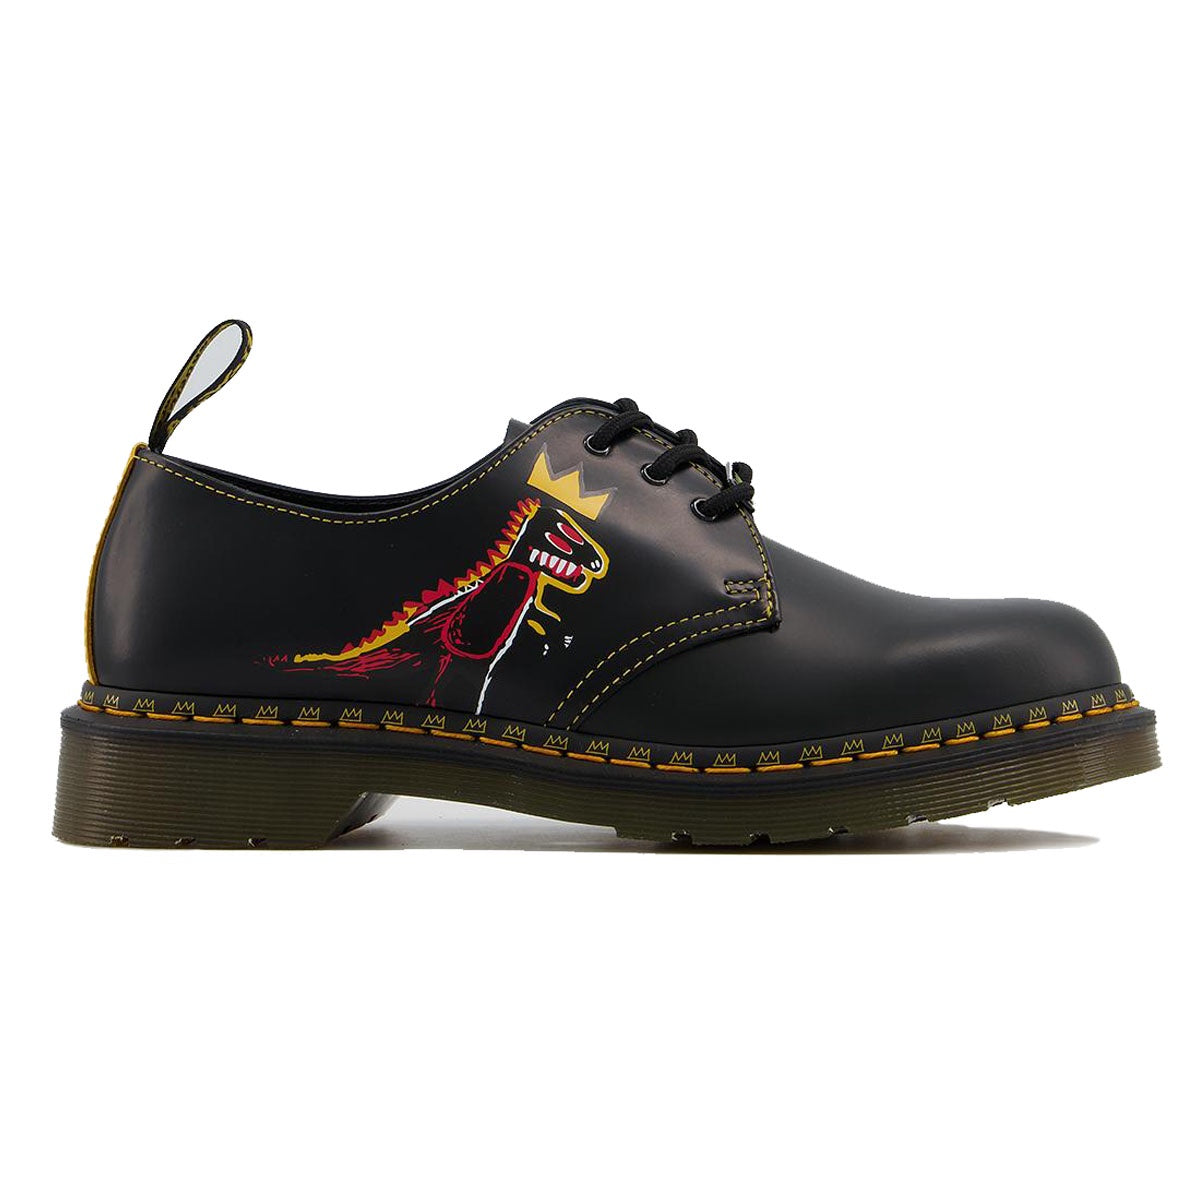 Dr. Martens x Basquiat II 1461 Pez Smooth Shoes Black Yellow